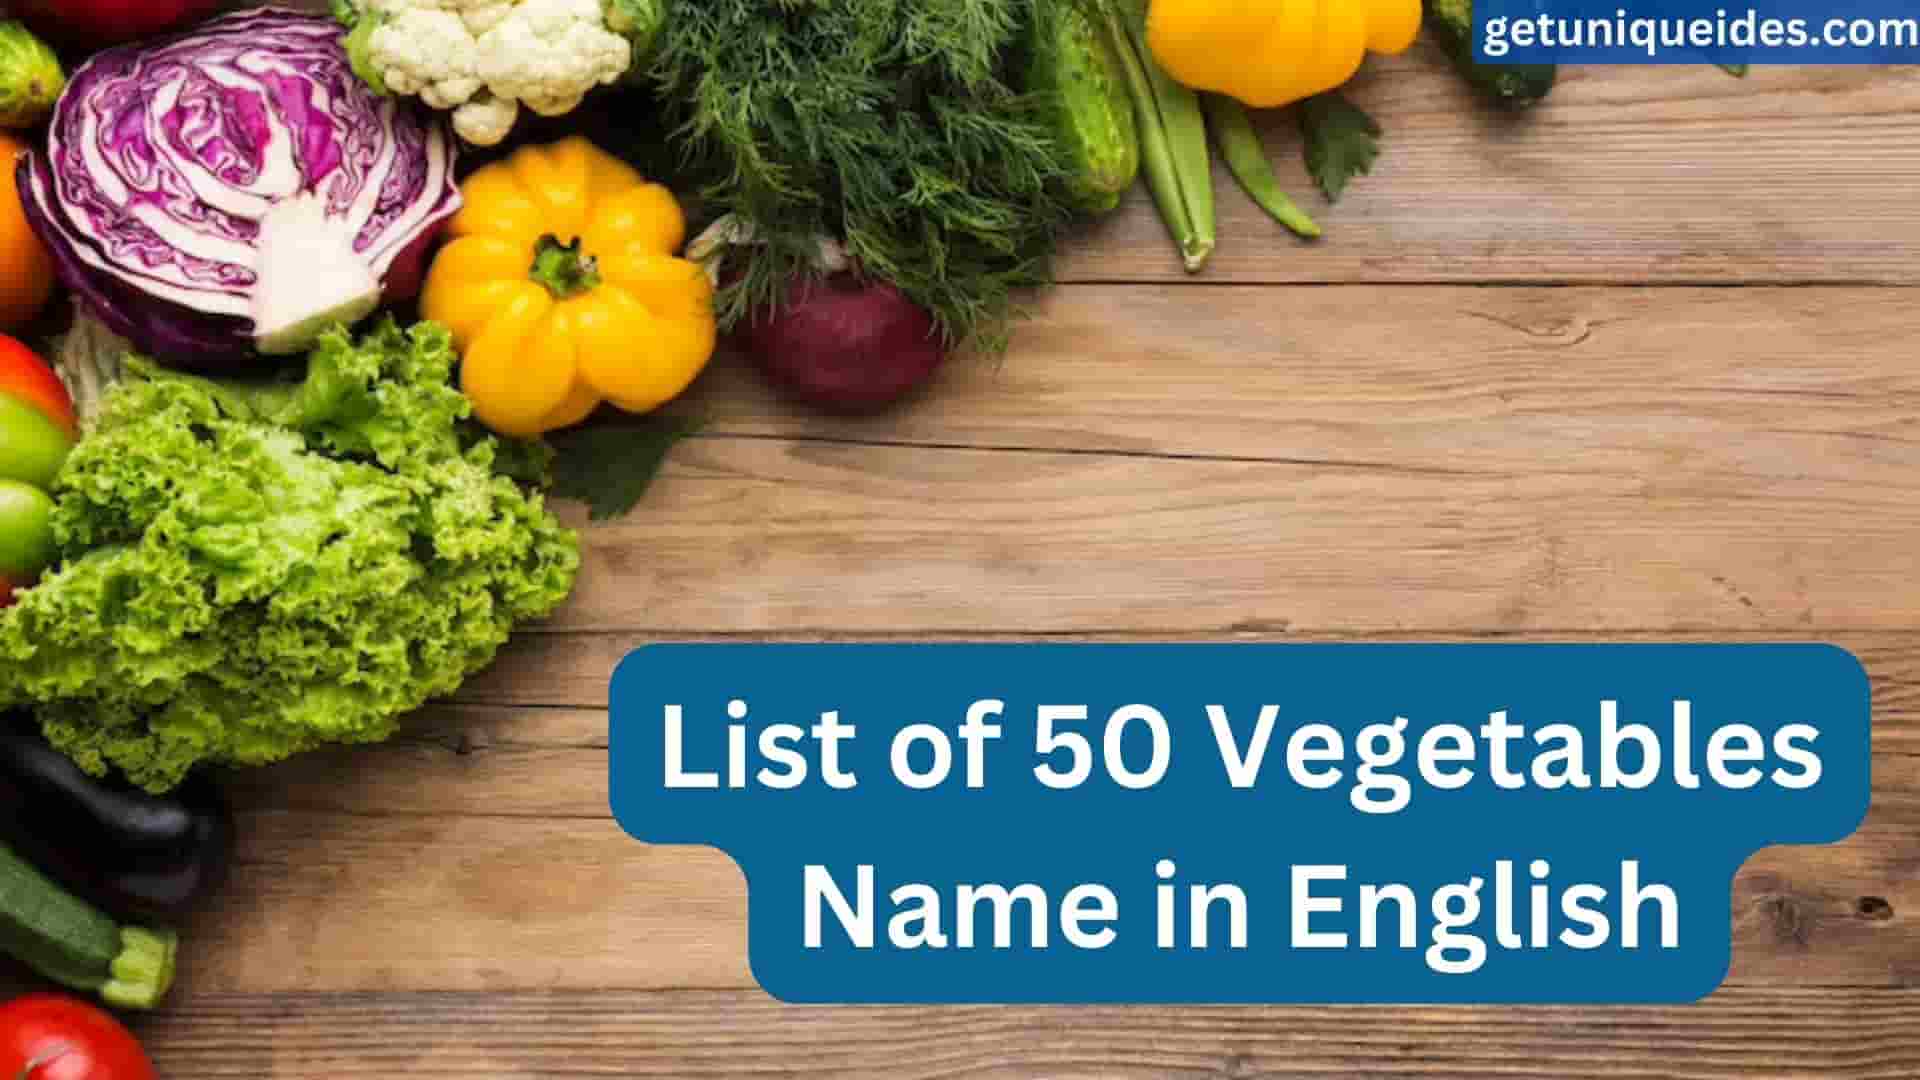 List of 50 Vegetables Name in English